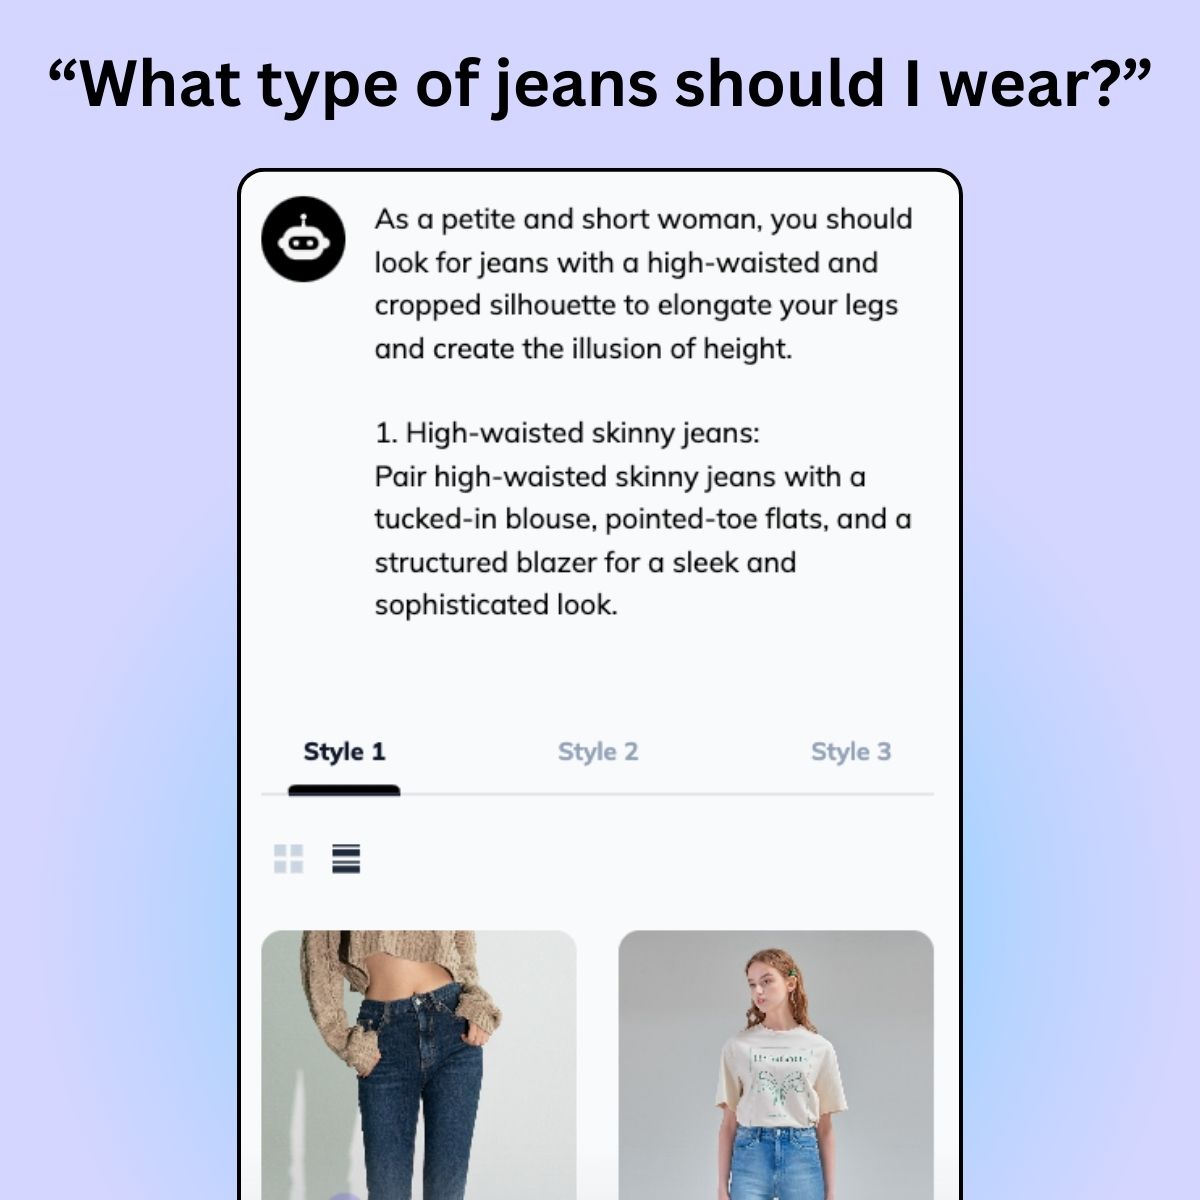 AI Stylist recommending a type of jeans for petite size woman